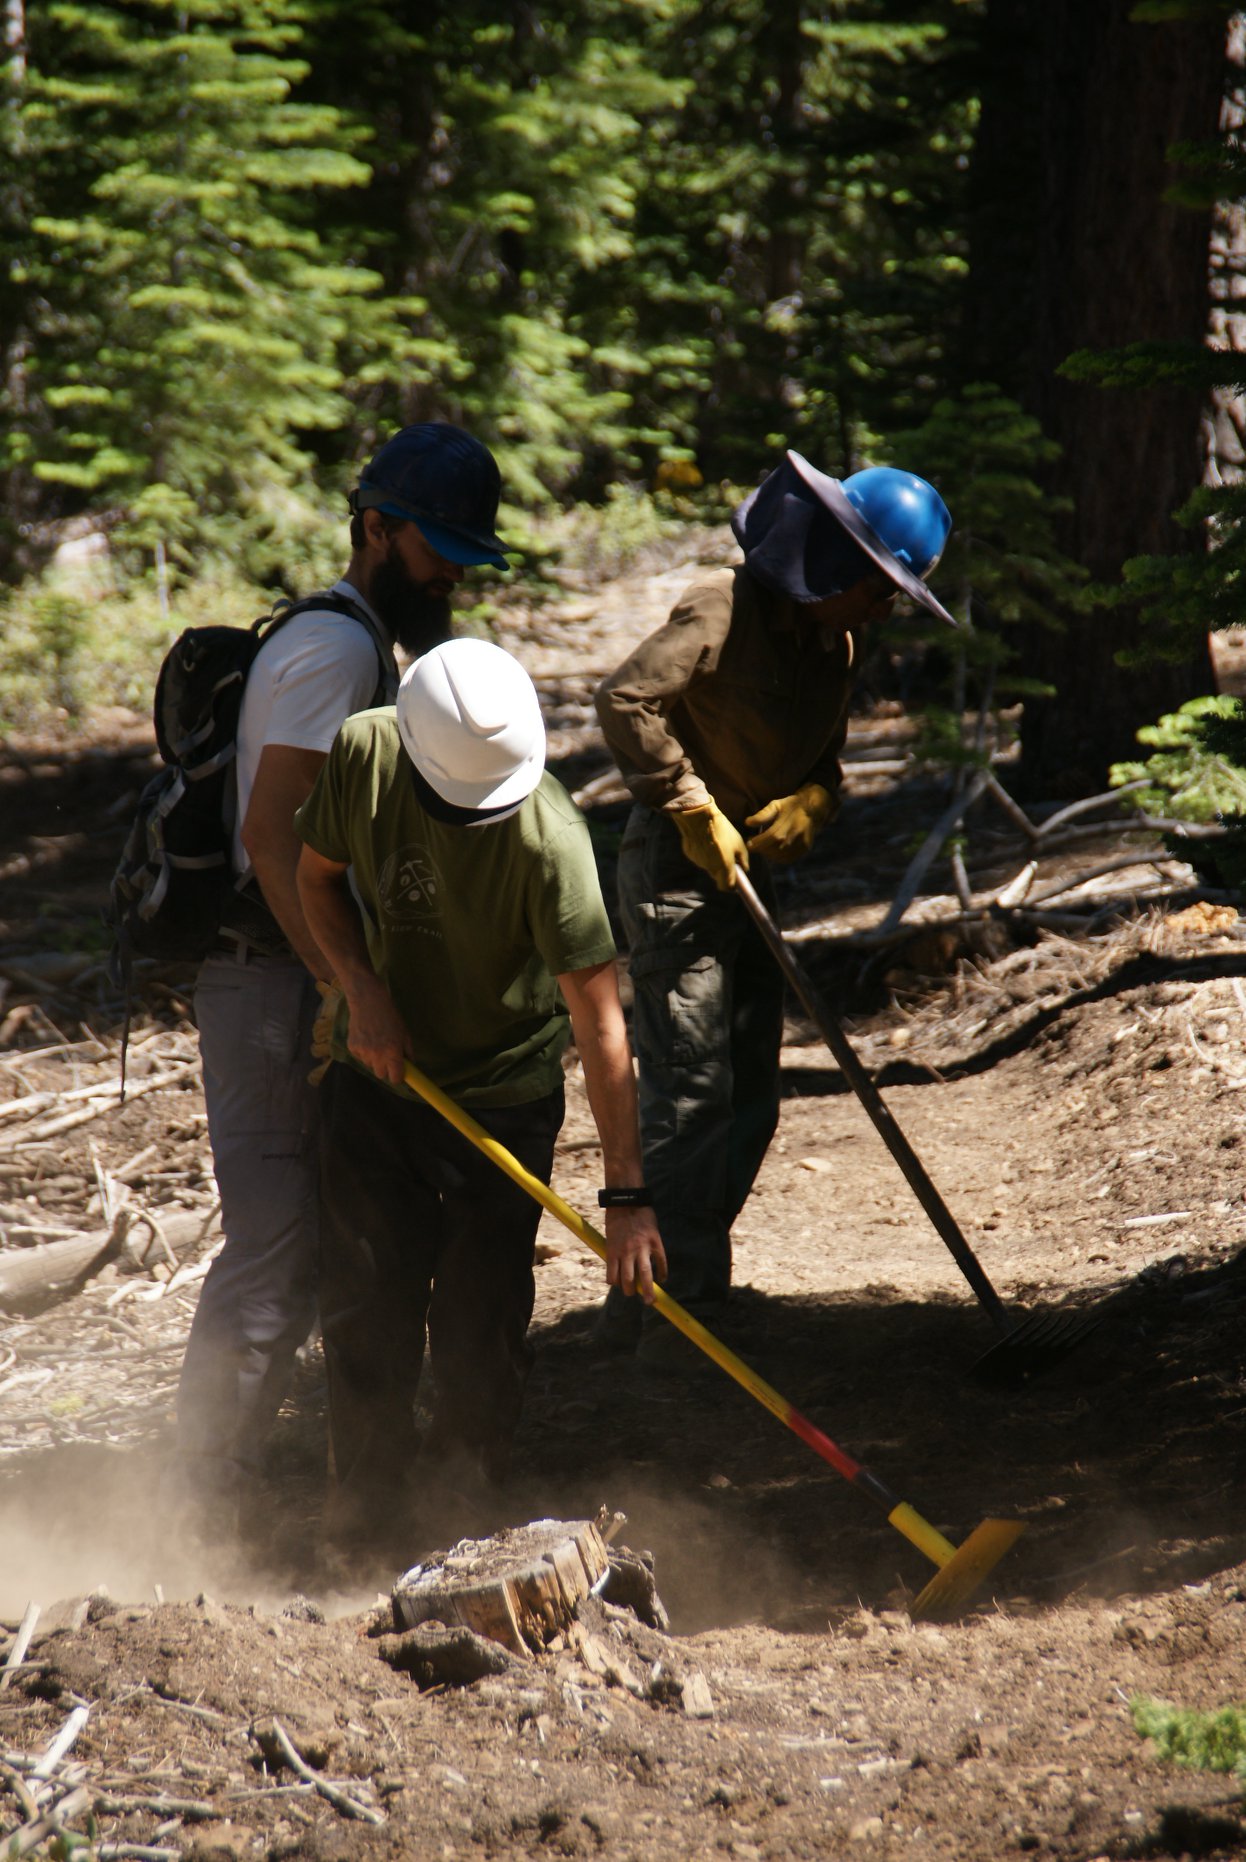 three men in hard hats using hoes to work the ground in a forested area